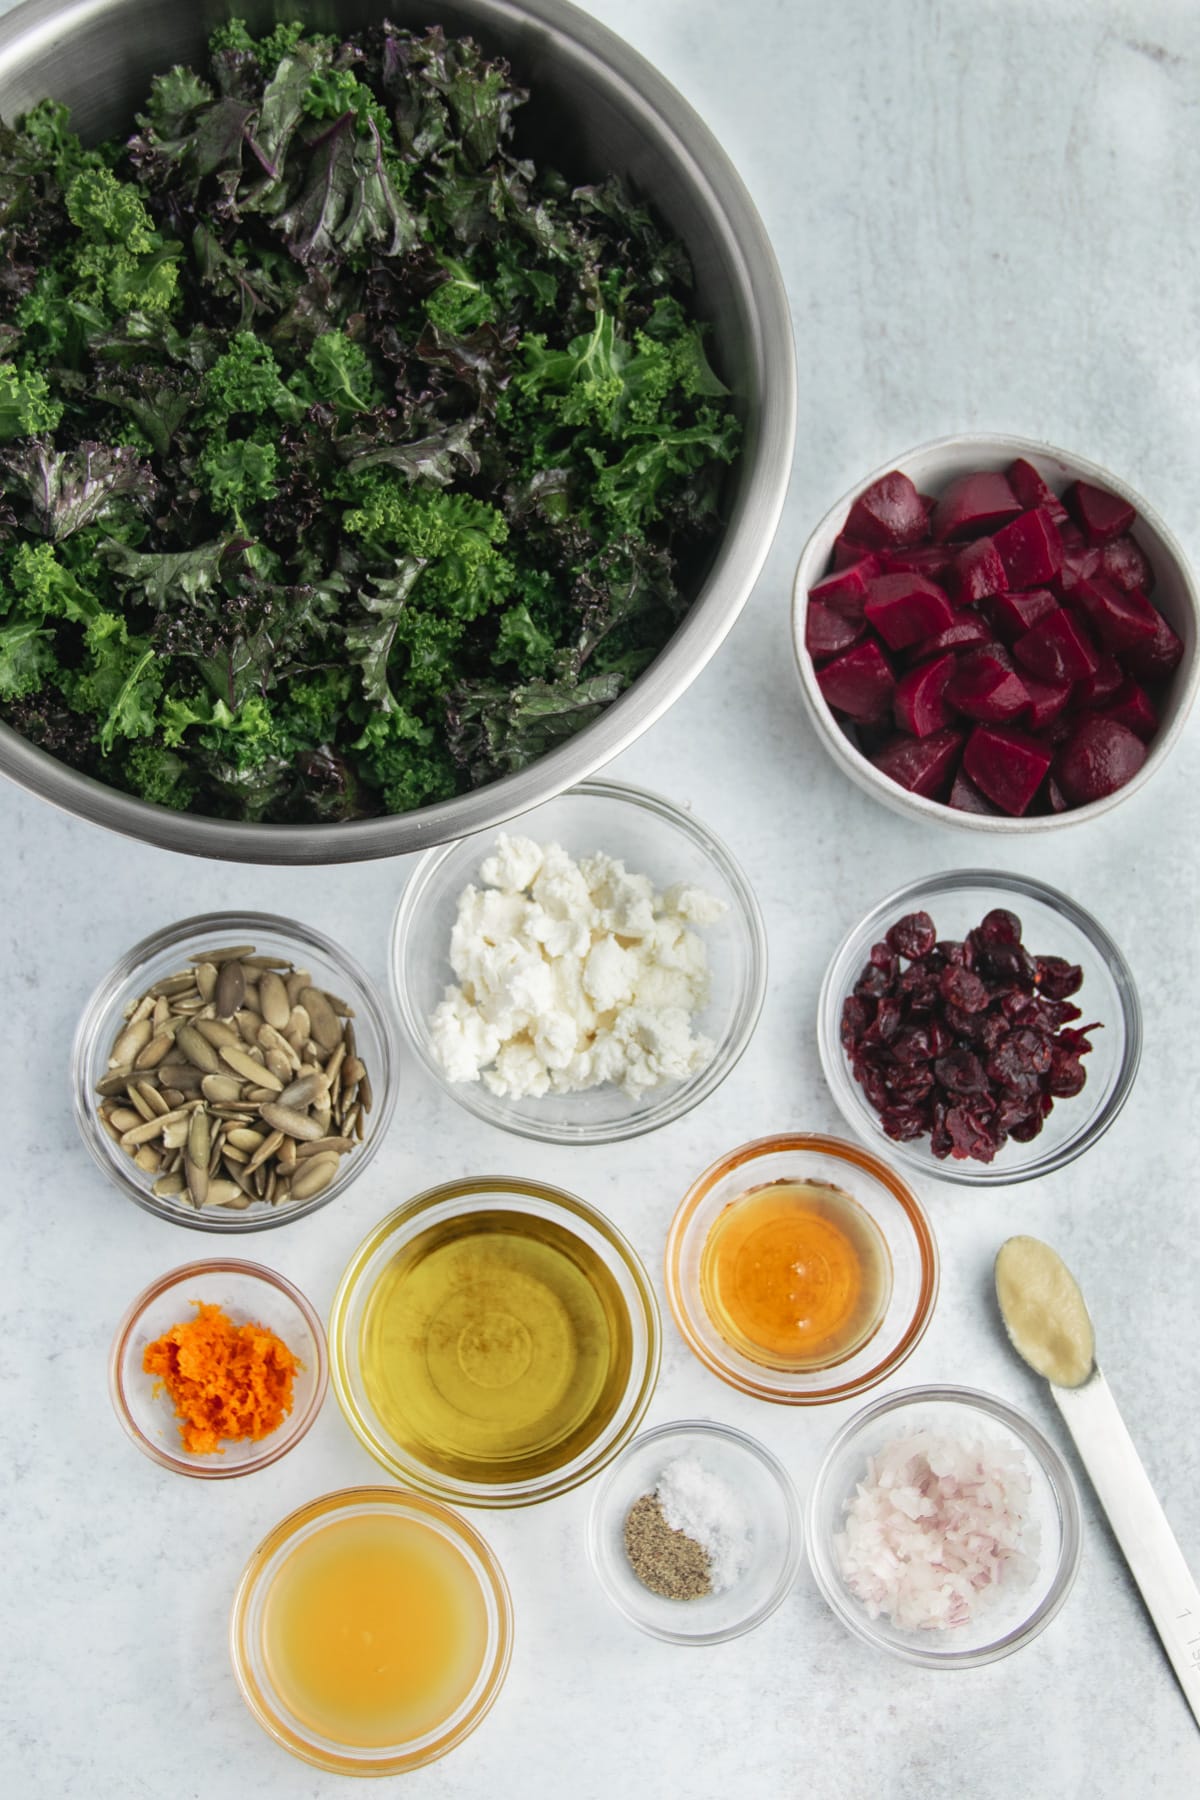 This is a picture of all the ingredients used to make this kale salad. 